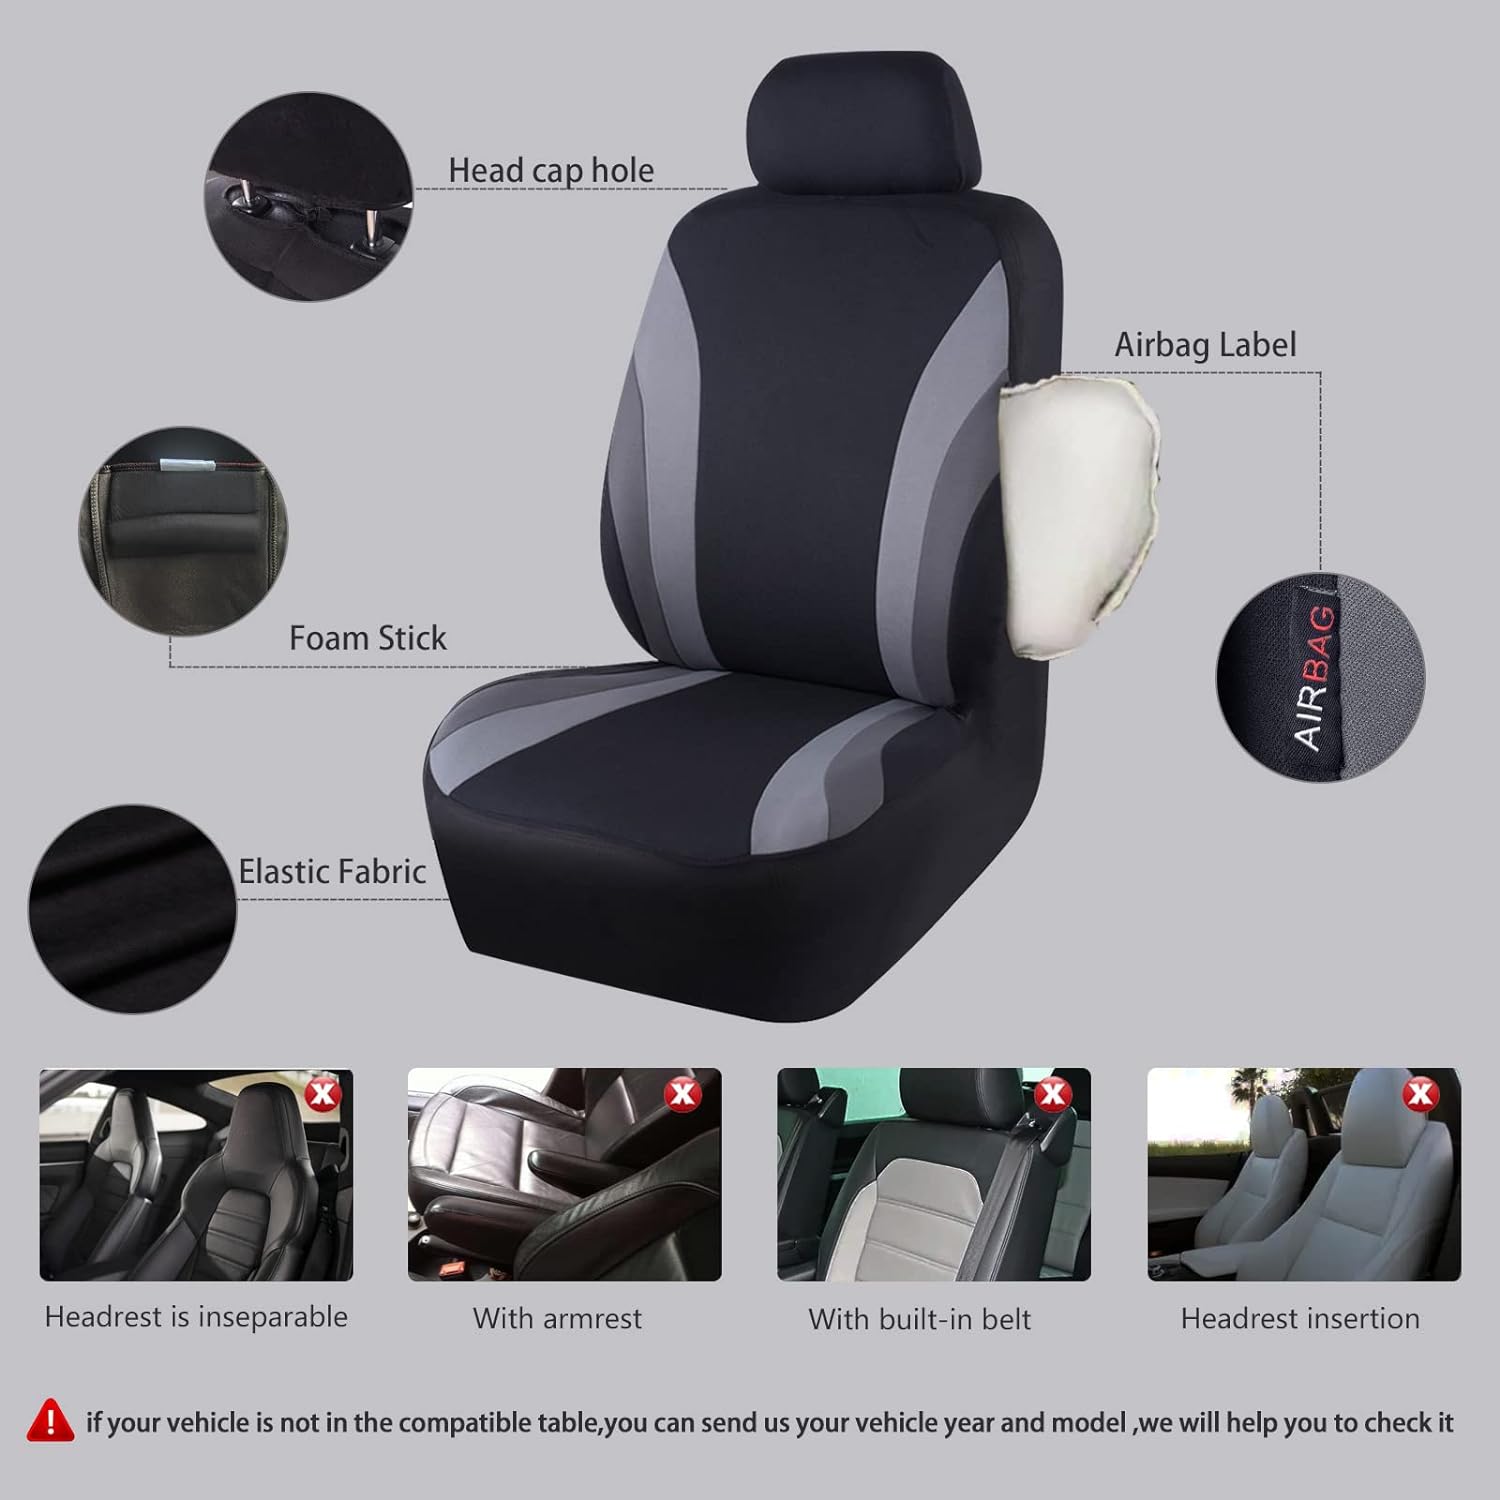 CAR PASS Line Rider Sporty Cloth 11PCS Universal Fit Car Seat Cover with Leather Waterproof Sporty Car Floor Mats Carpet and Microfiber Leather Sporty Steering Wheel Cover,Universal Fits for 95% Truck